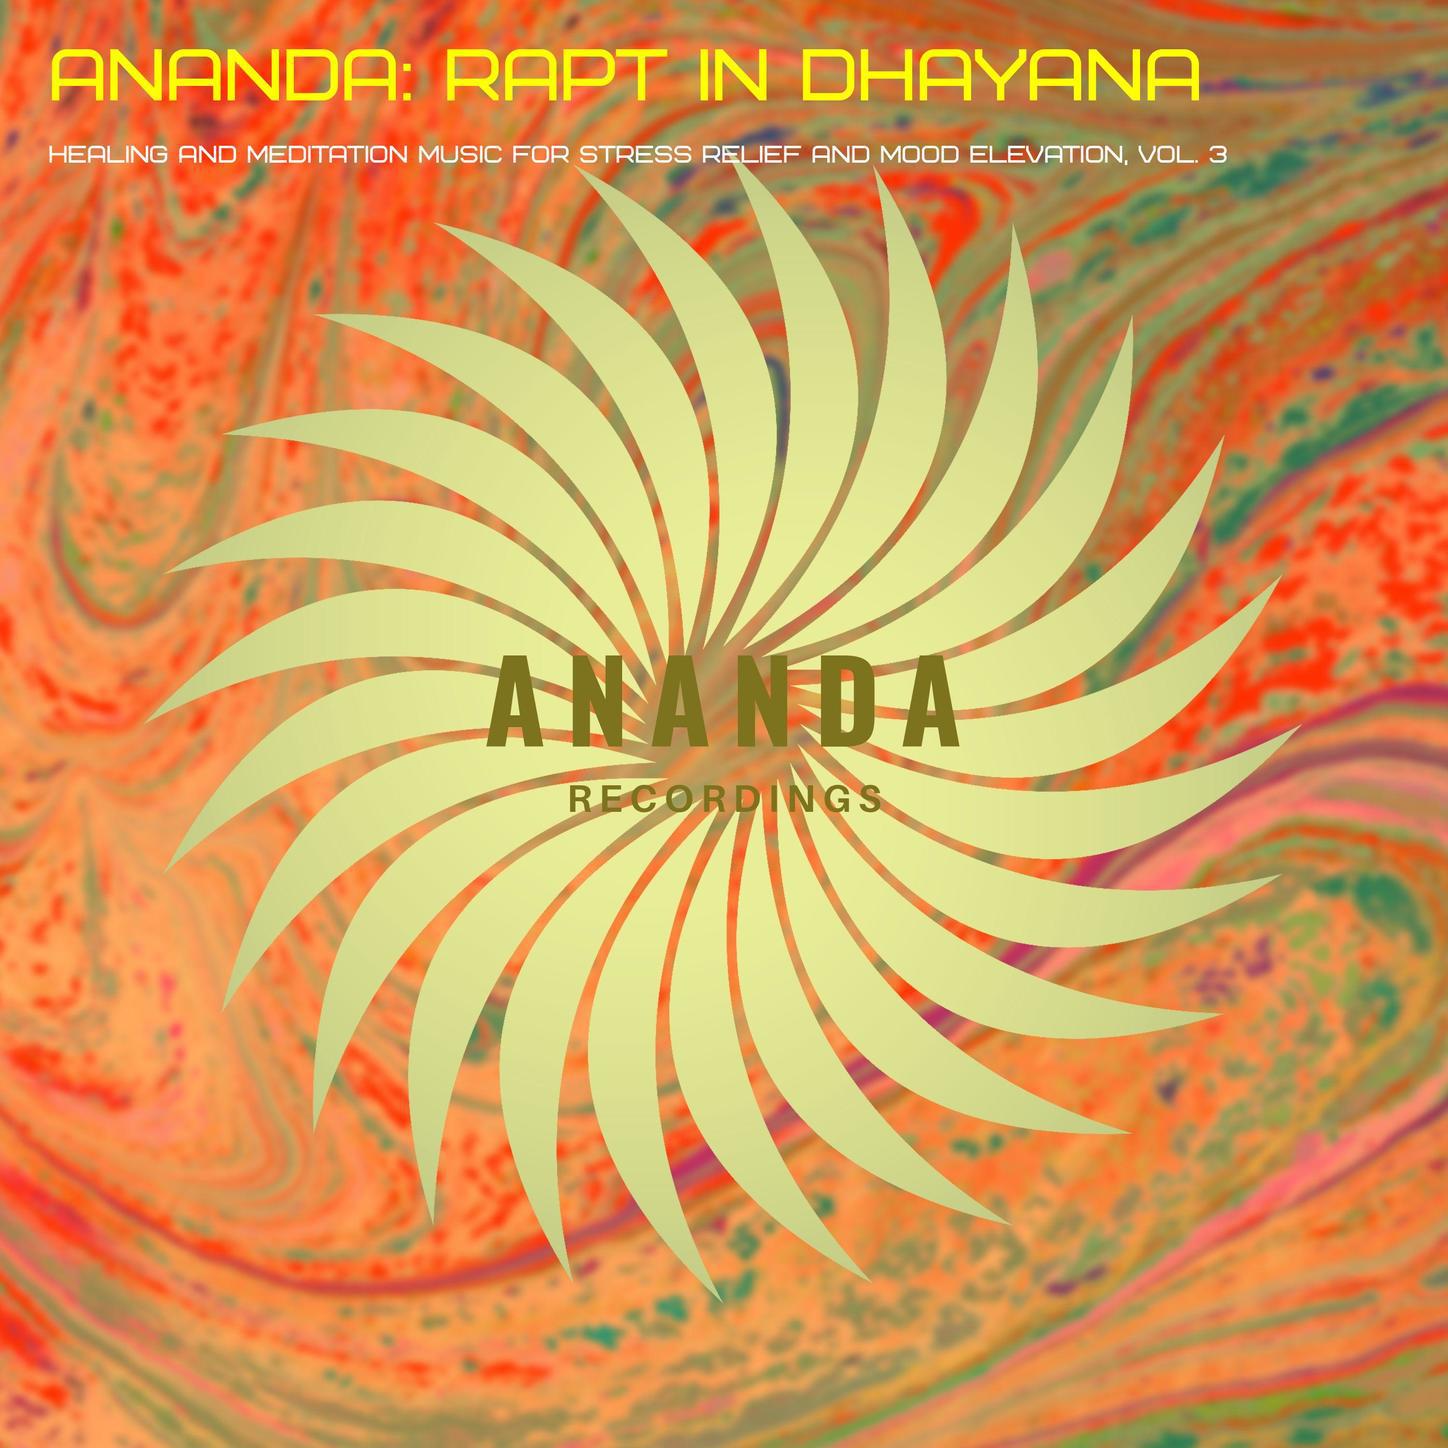 Ananda: Rapt in Dhayana (Healing and Meditation Music for Stress Relief and Mood Elevation), Vol. 3